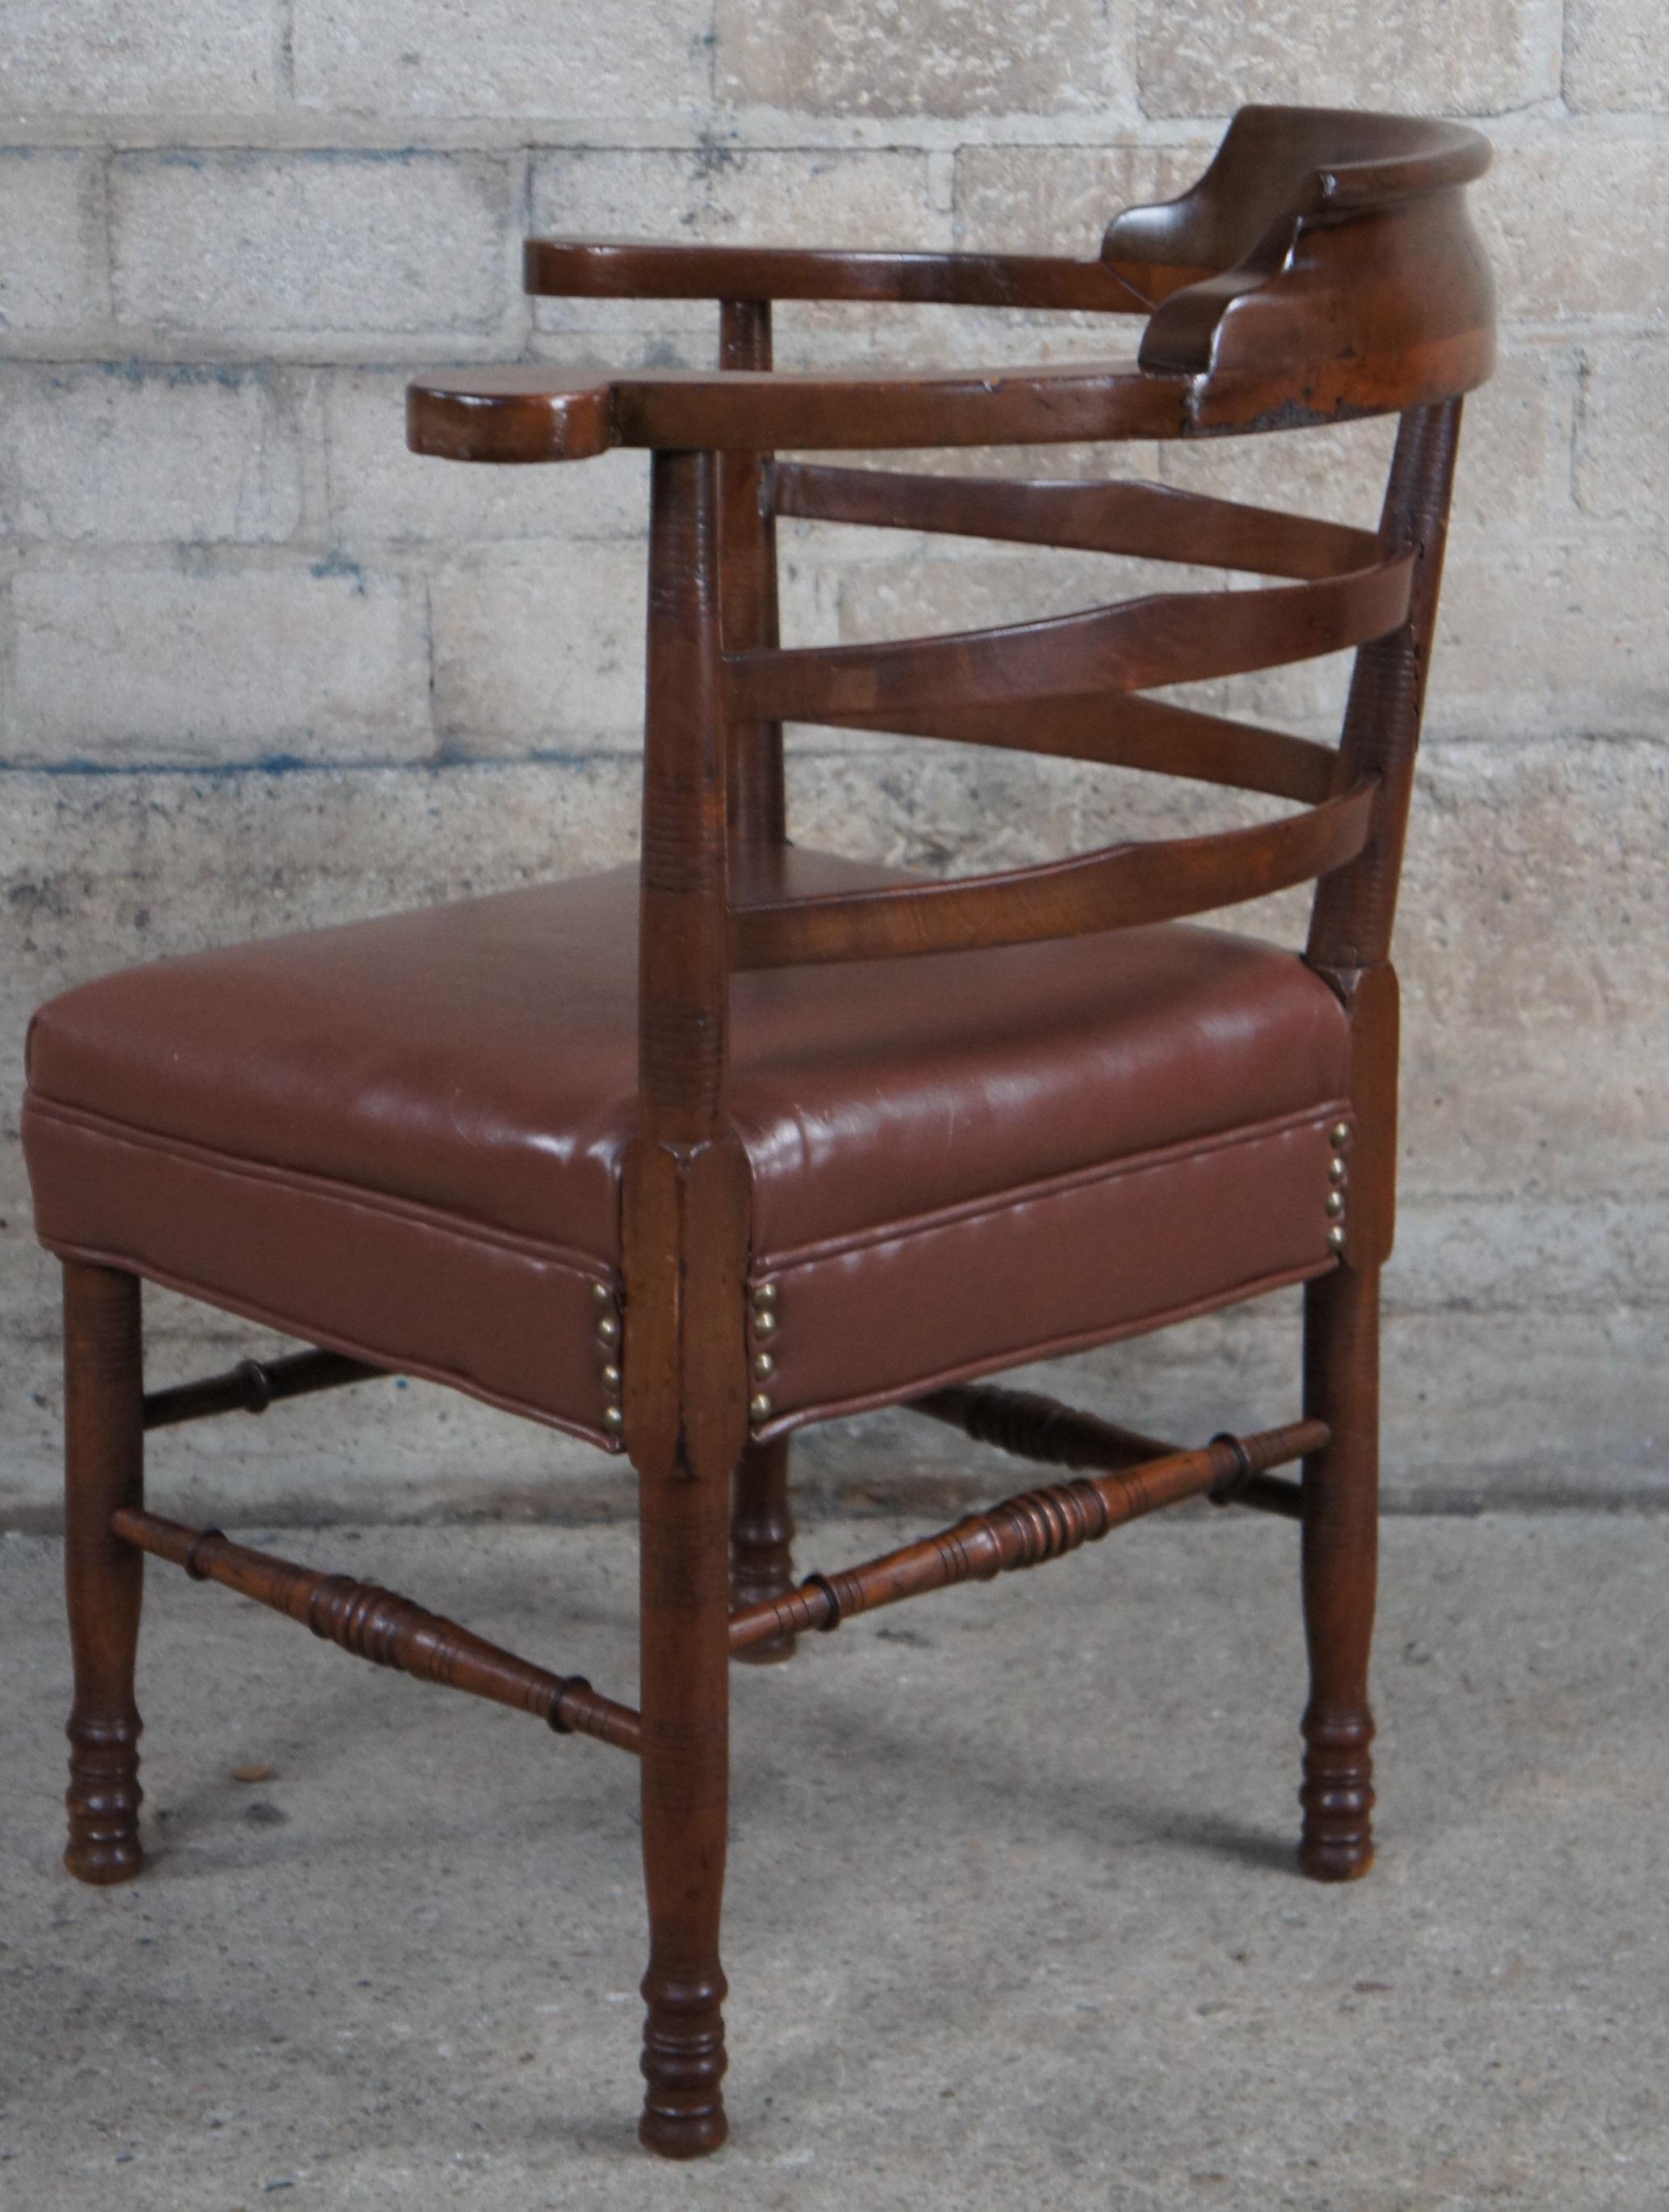 Antique English Country Mahogany Ladderback Roundabout Corner Arm Chair Seat In Good Condition For Sale In Dayton, OH